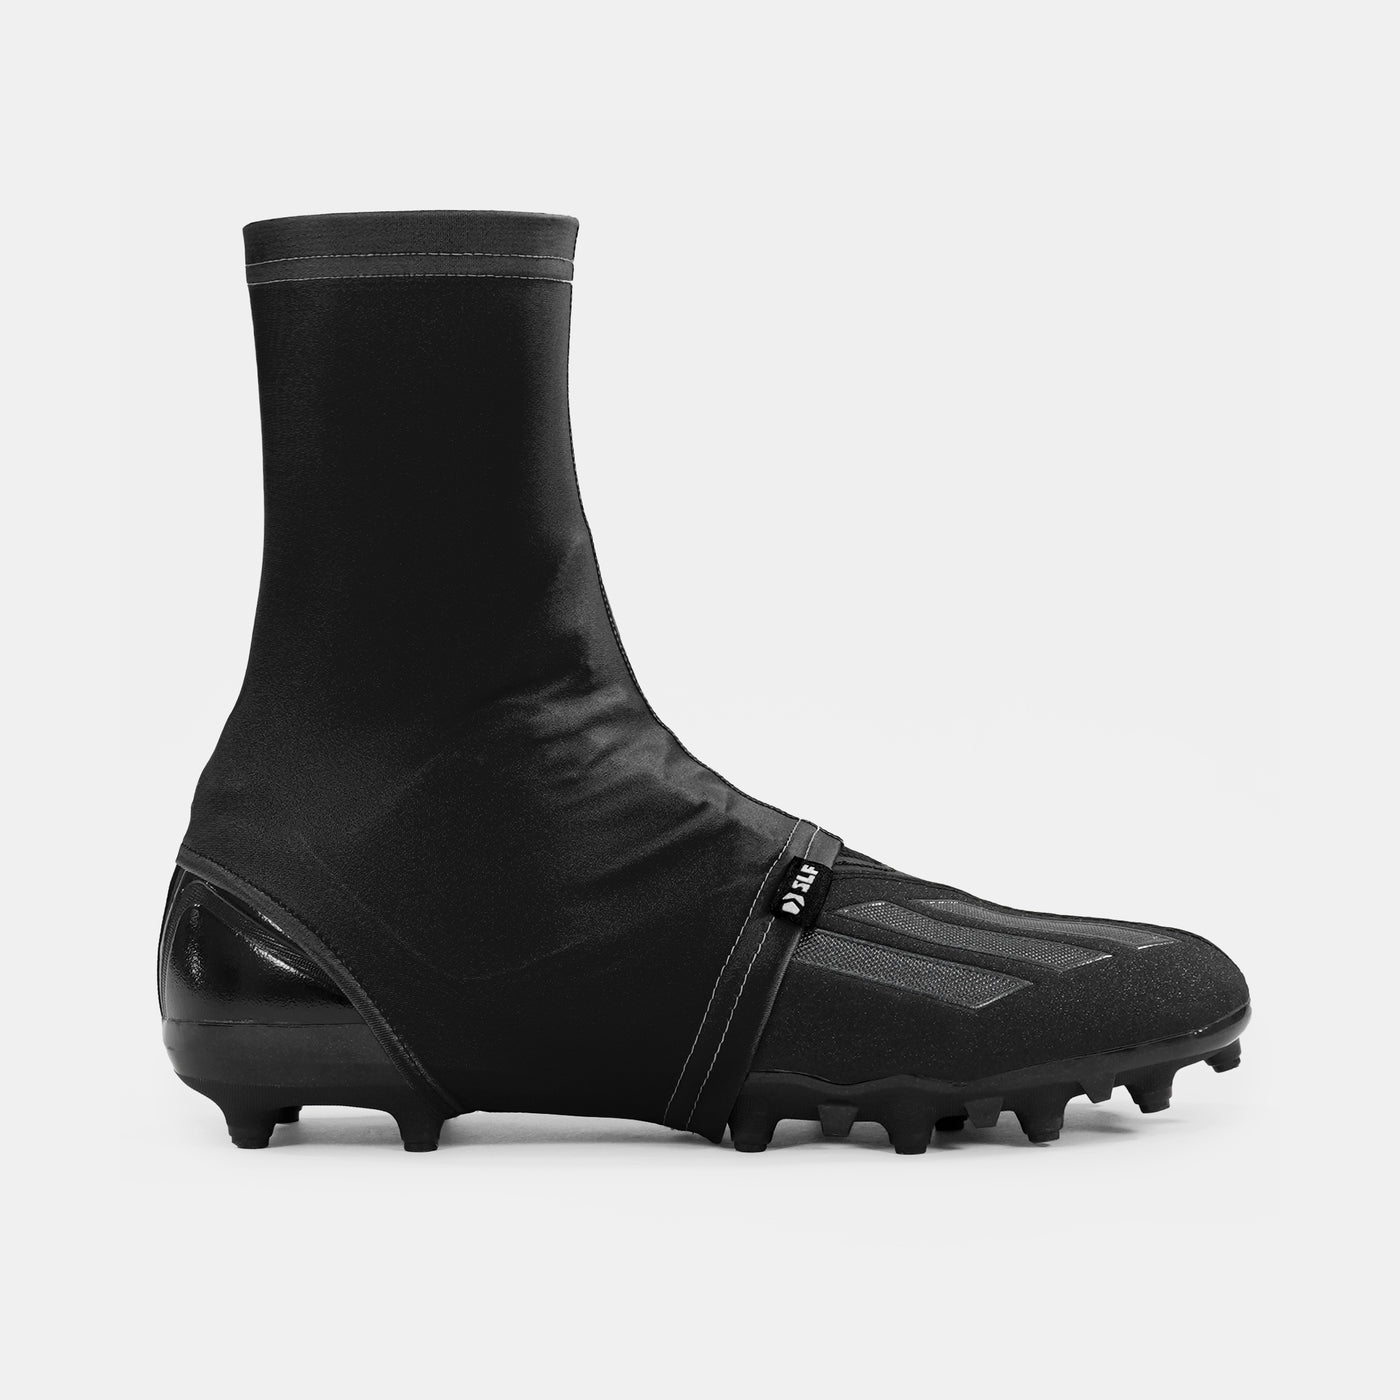 Basic Black Spats / Cleat Covers